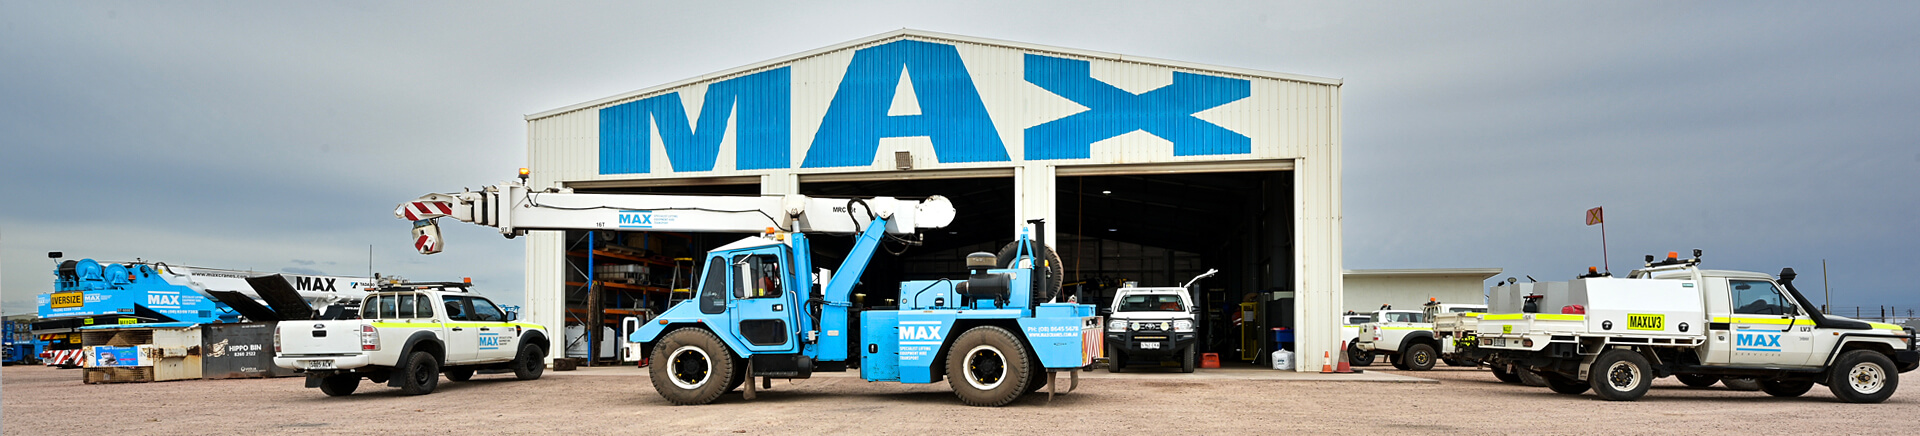 MAX Services Whyalla Depot